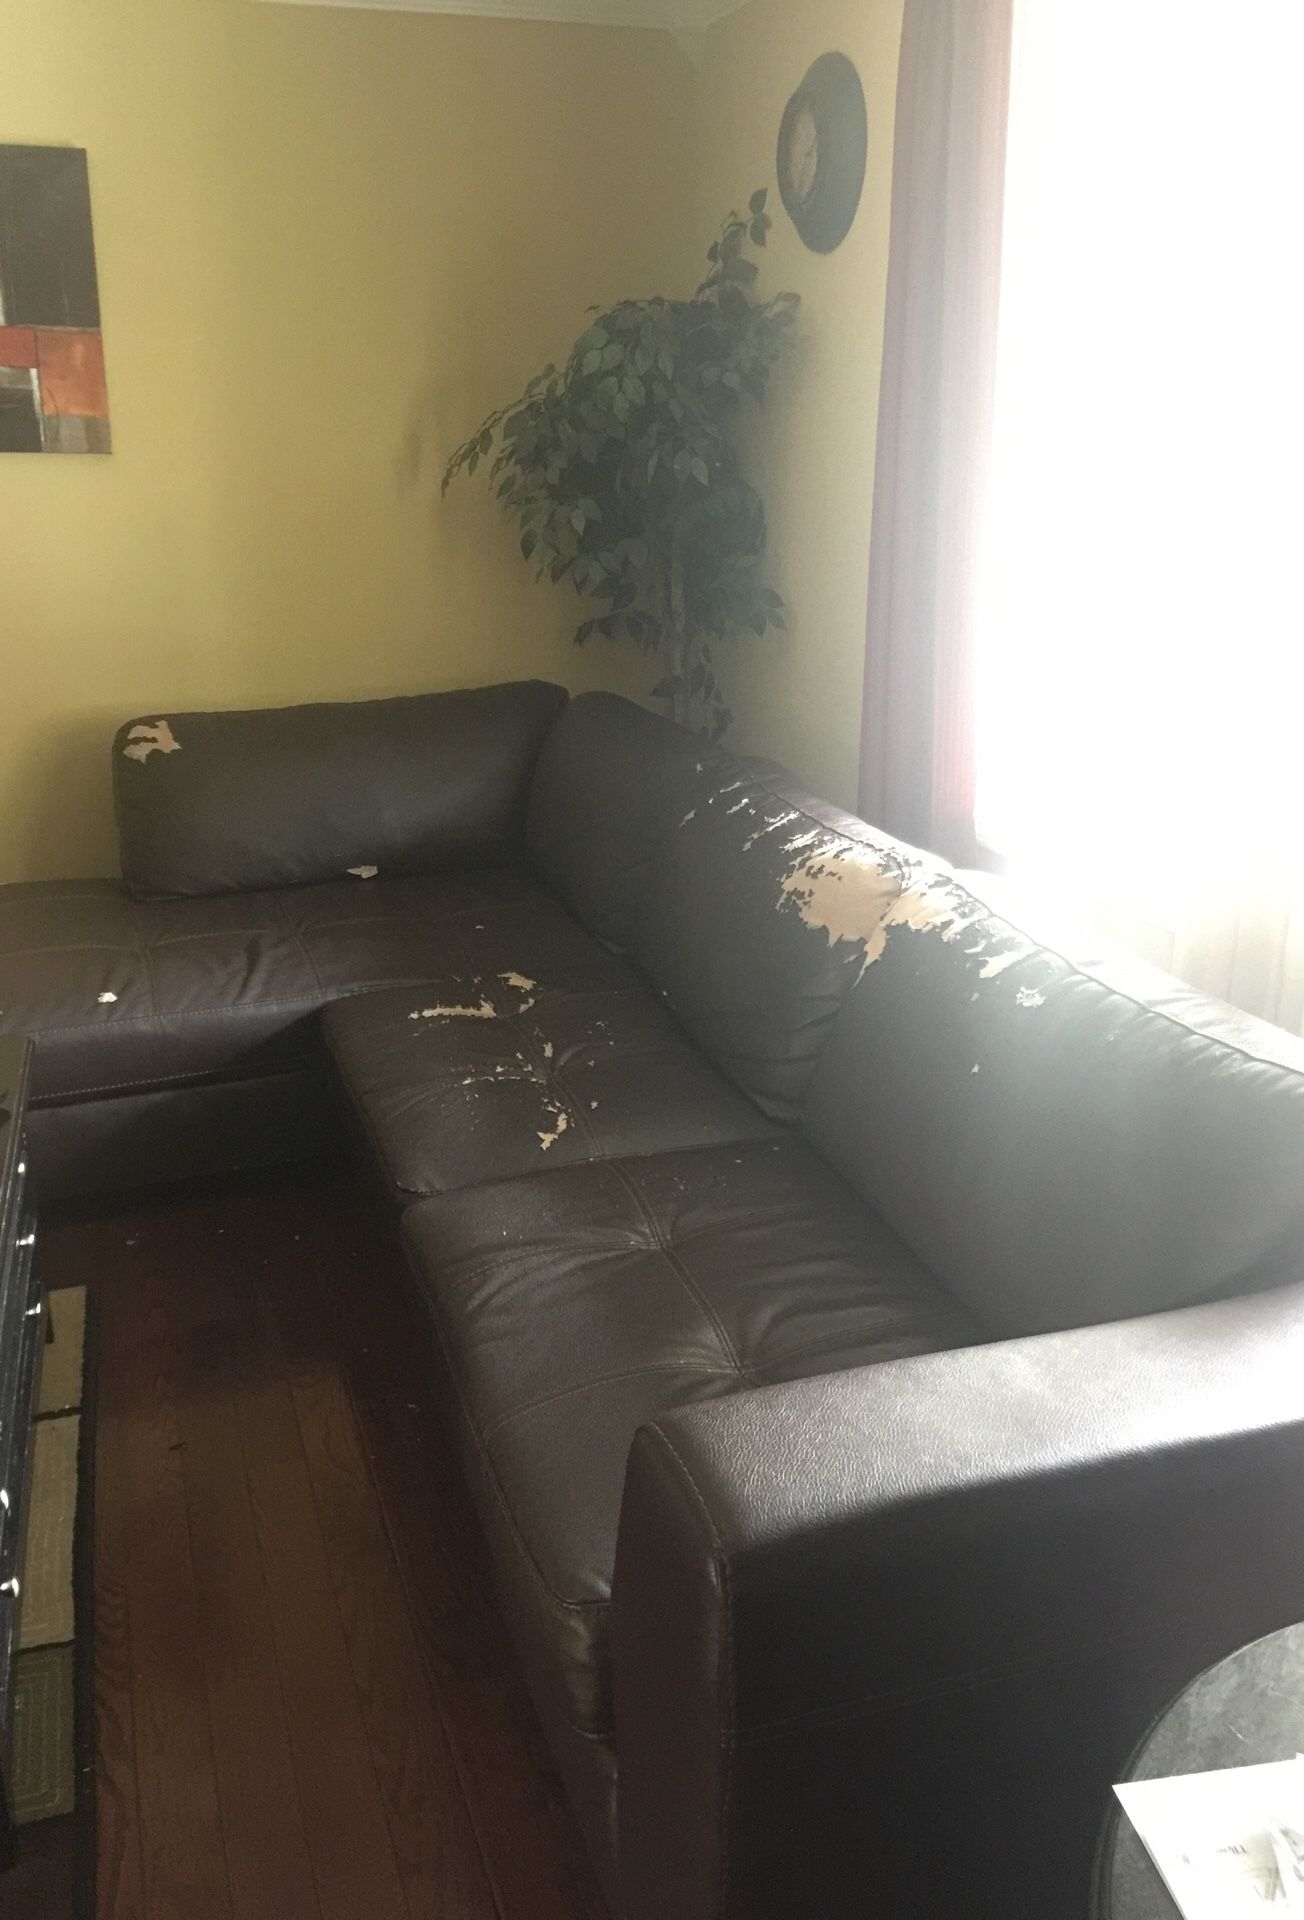 Bonded leather sectional